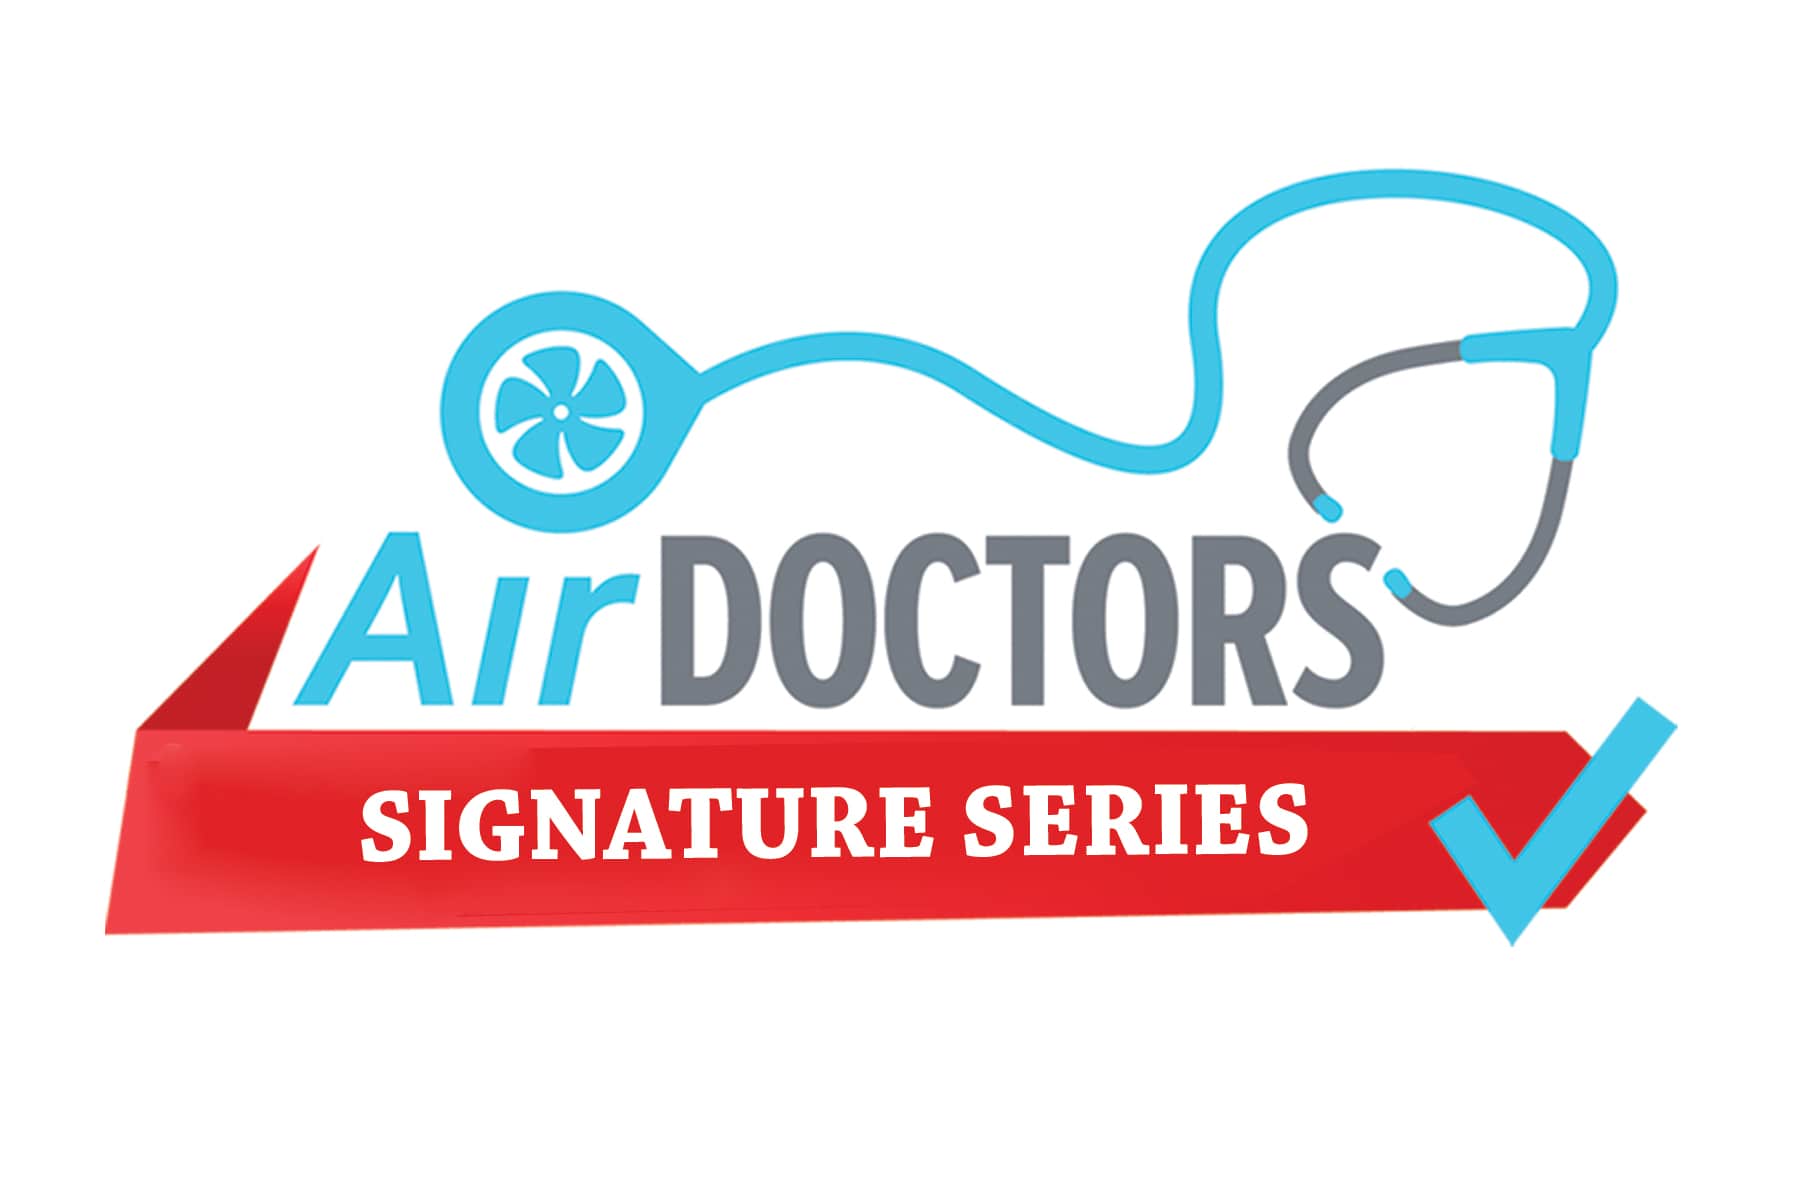 Check out Air Doctors signature series.